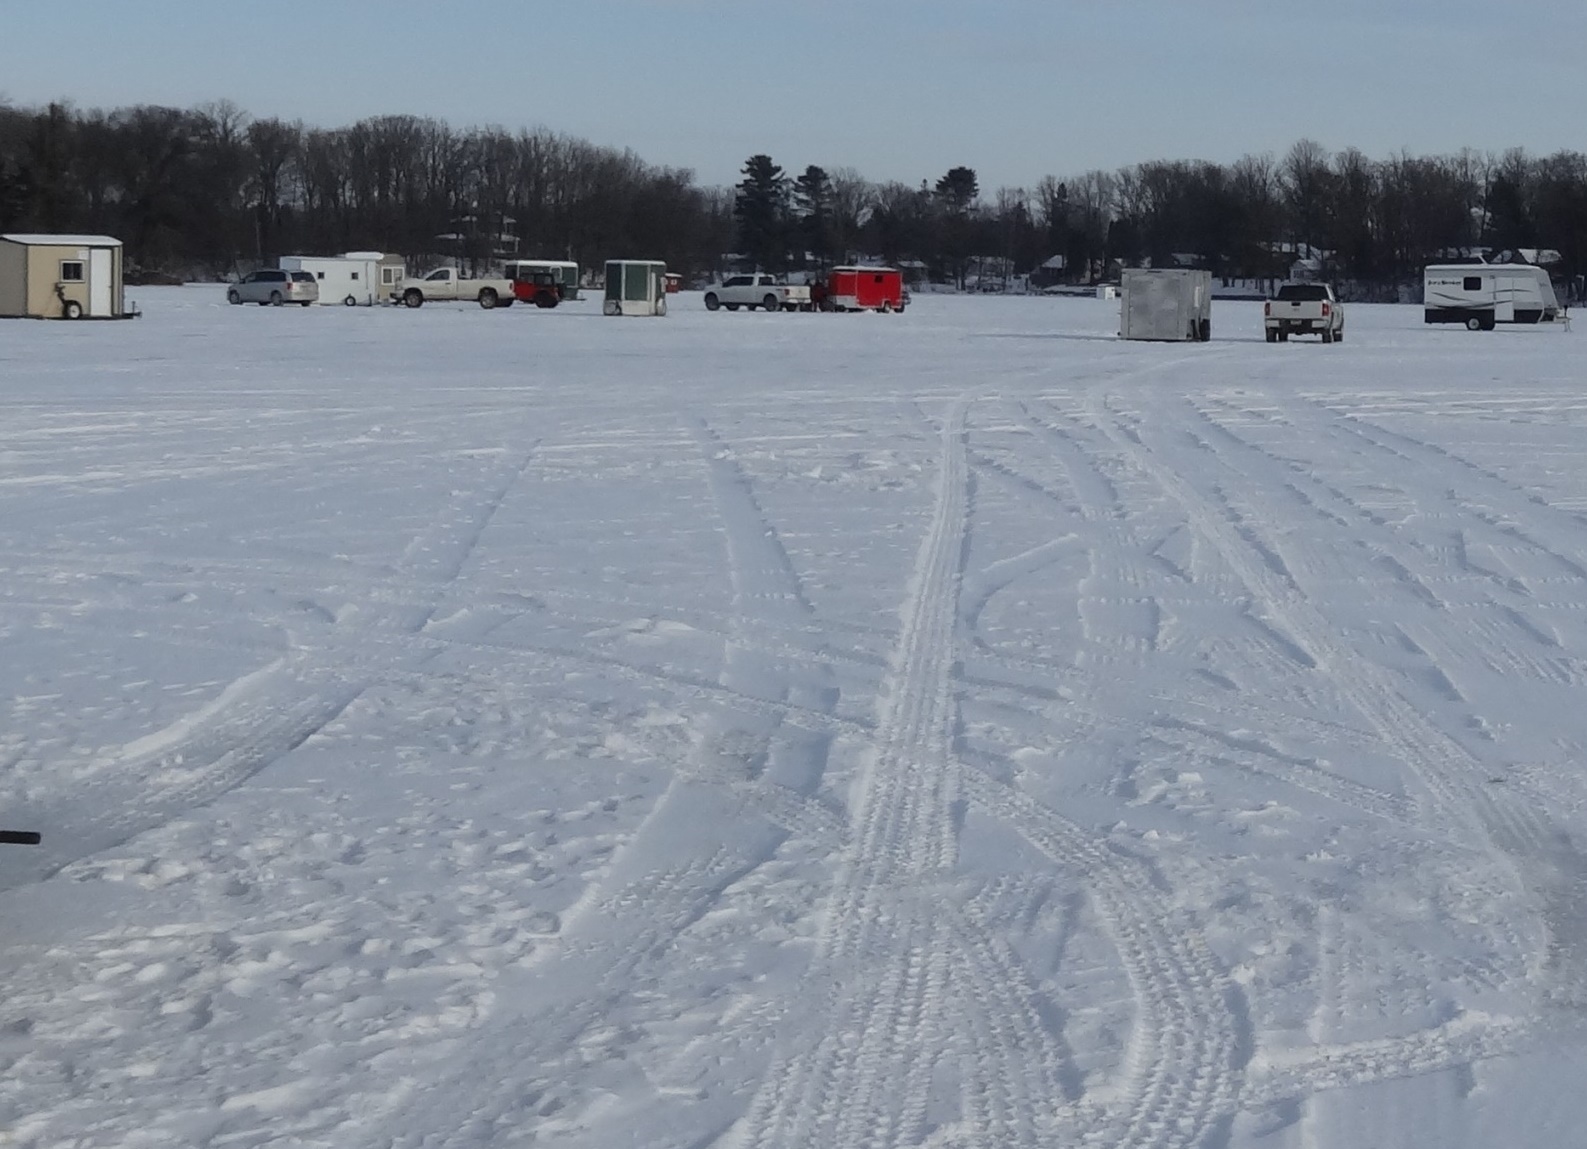 Small group of cars, pick-up trucks and ice shanties on the ice